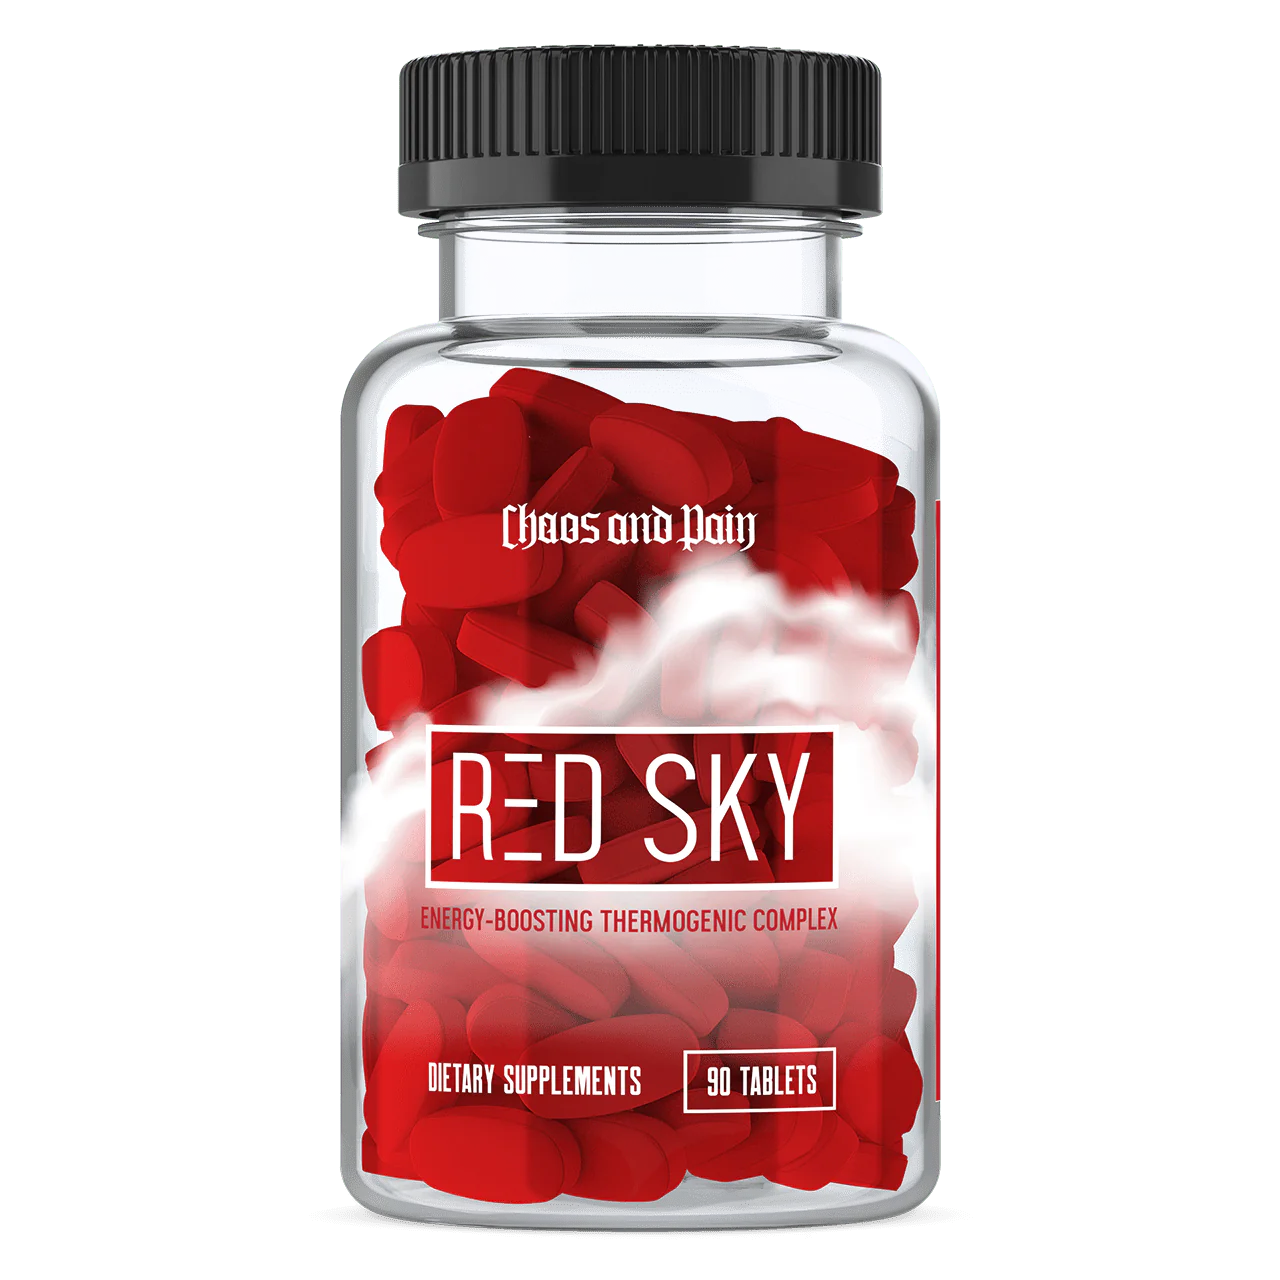 Chaos and Pain Red Sky Fat Burner